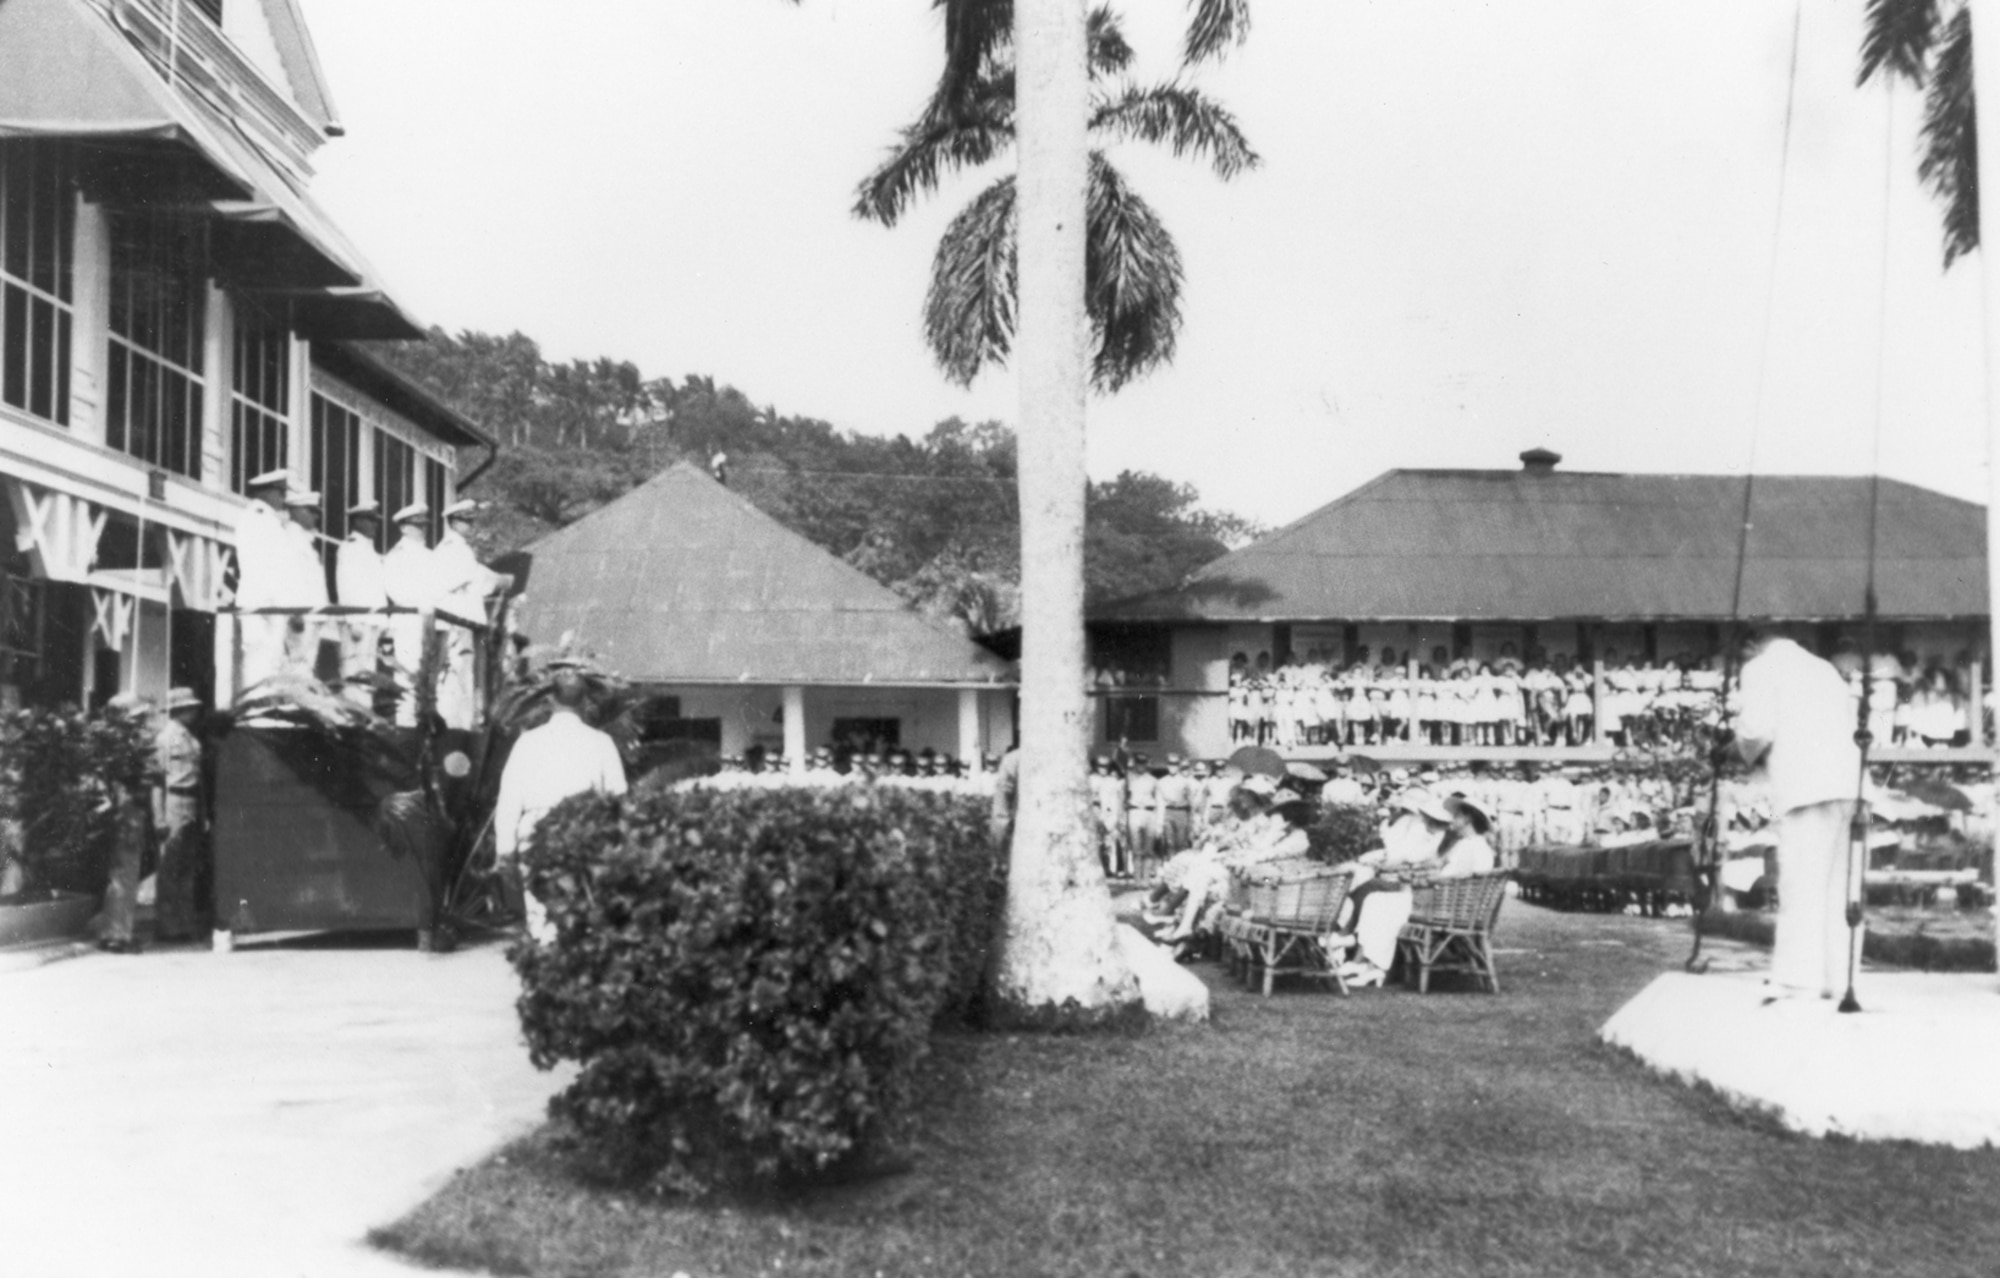 A Naval ceremony held before the Governor's Palace. (Courtesy photo provided by War in the Pacific NHP)